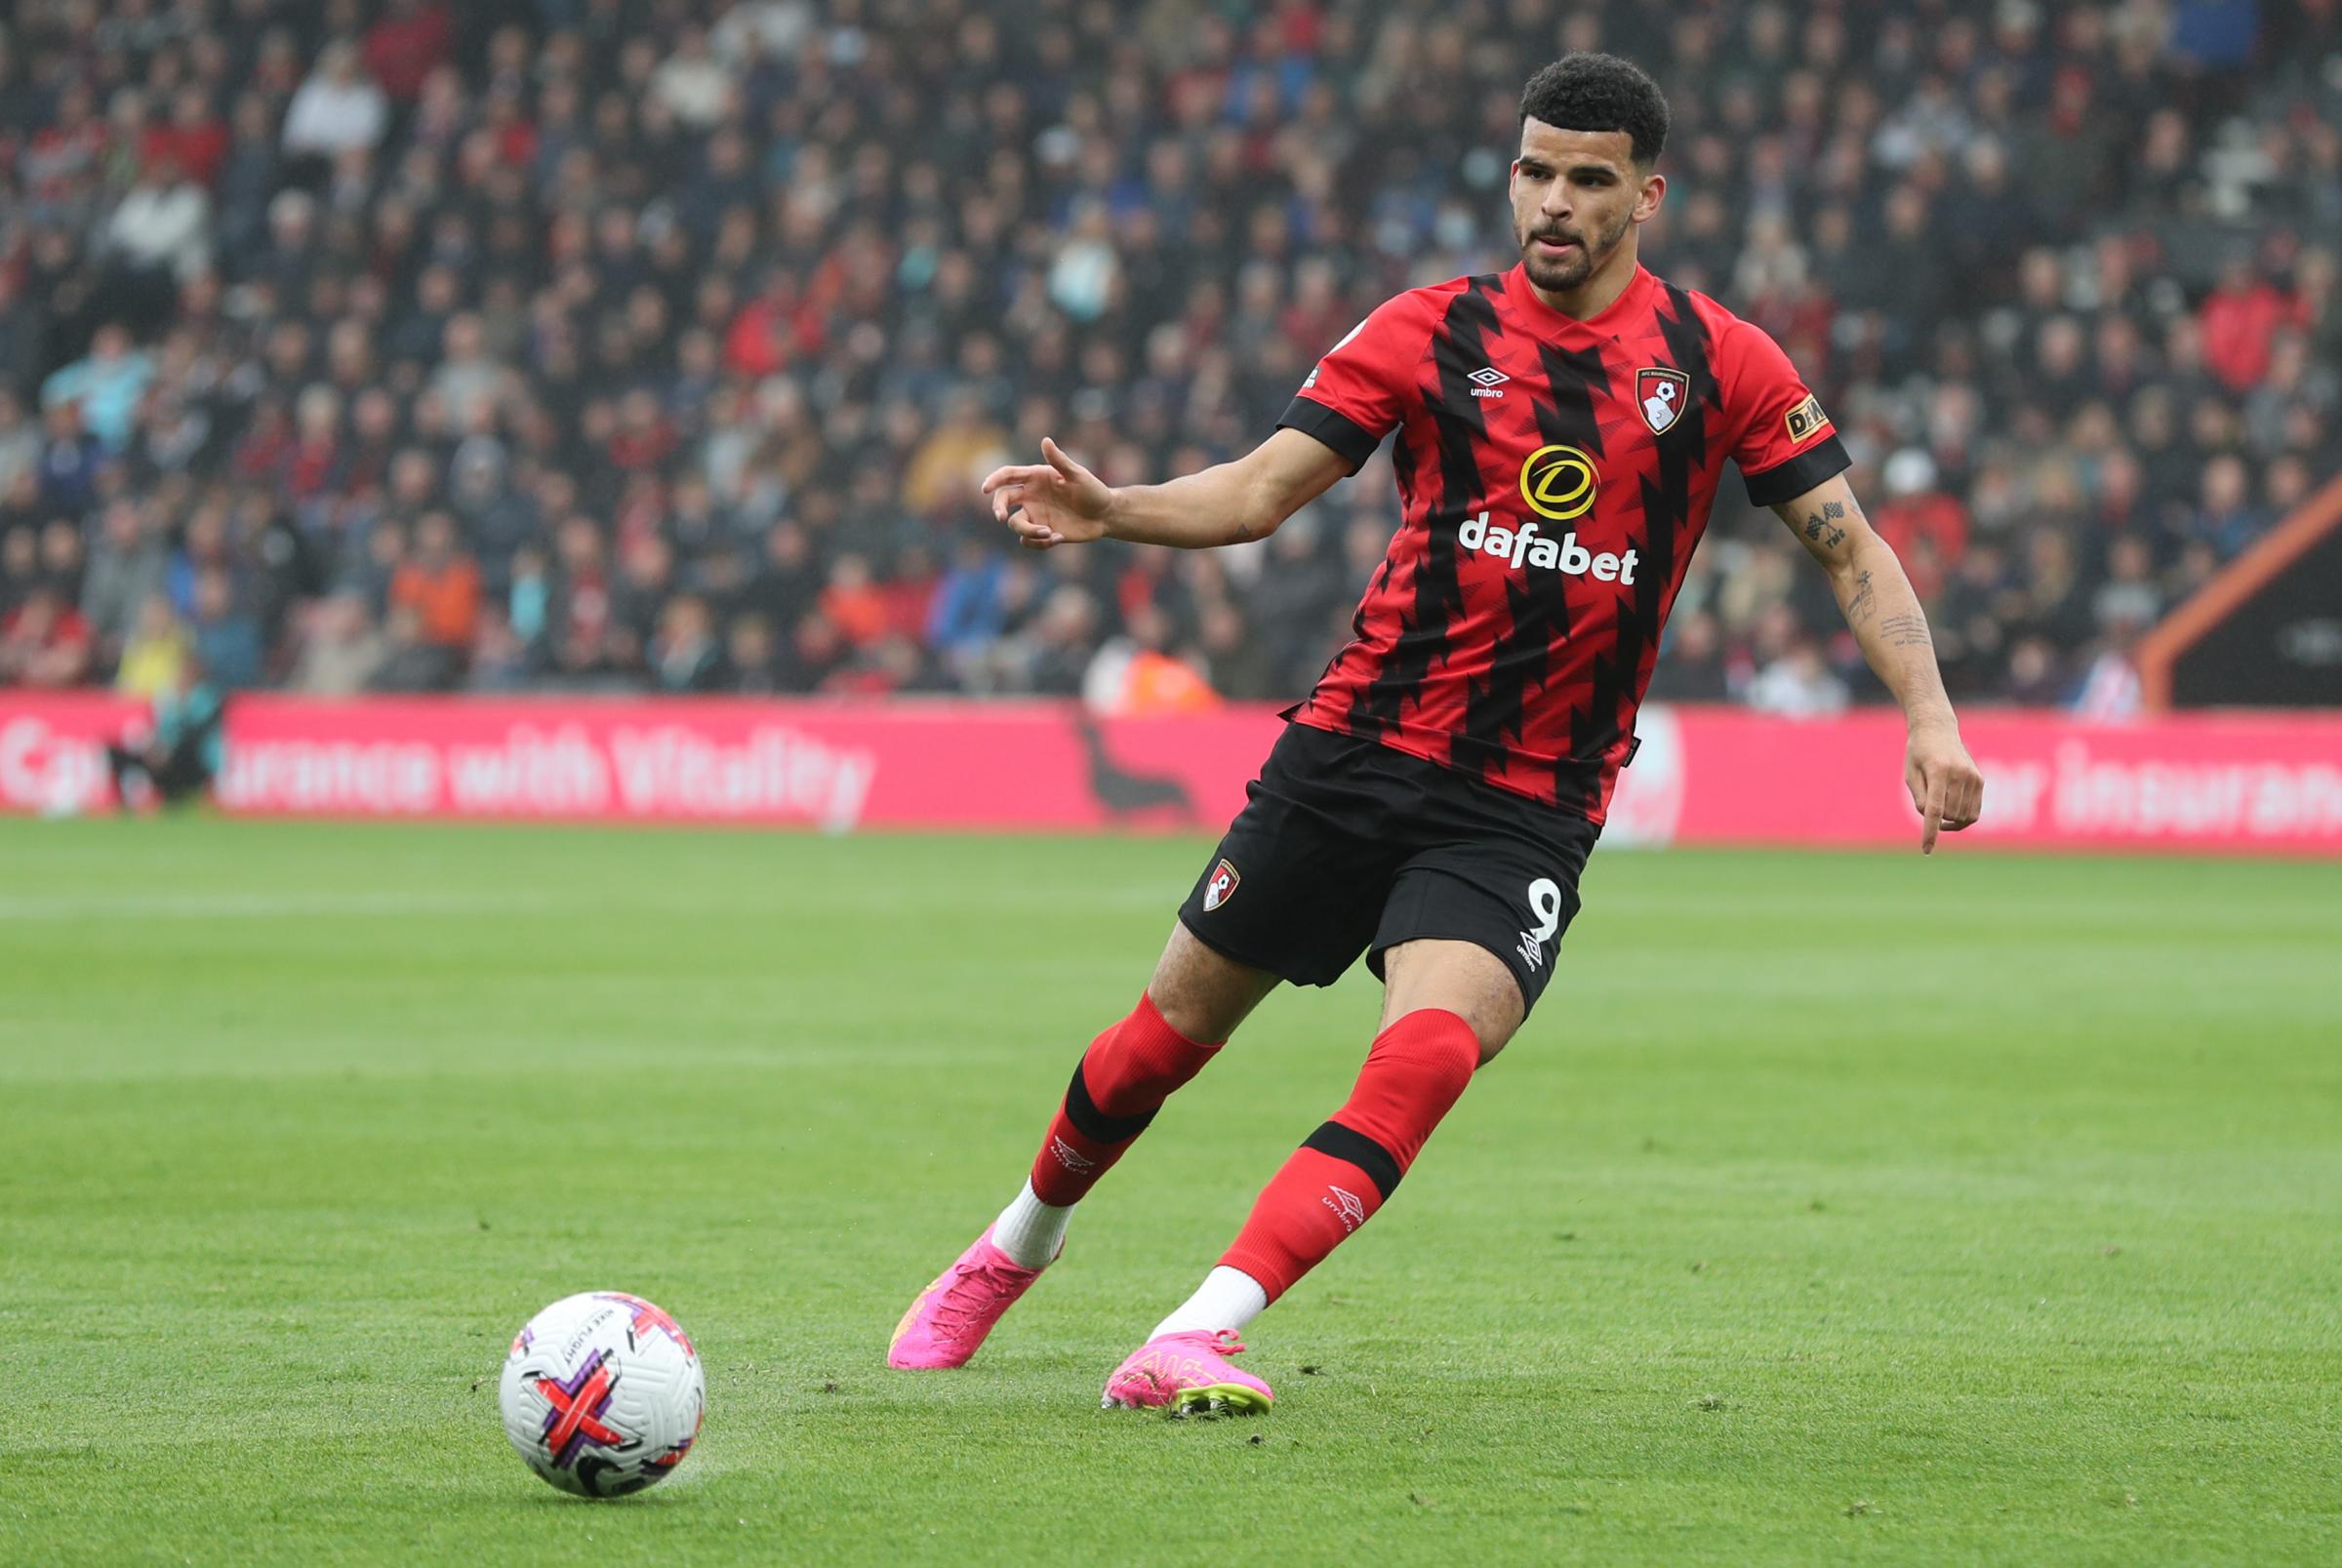 AFC Bournemouth's Dominic Solanke on finding form at right time